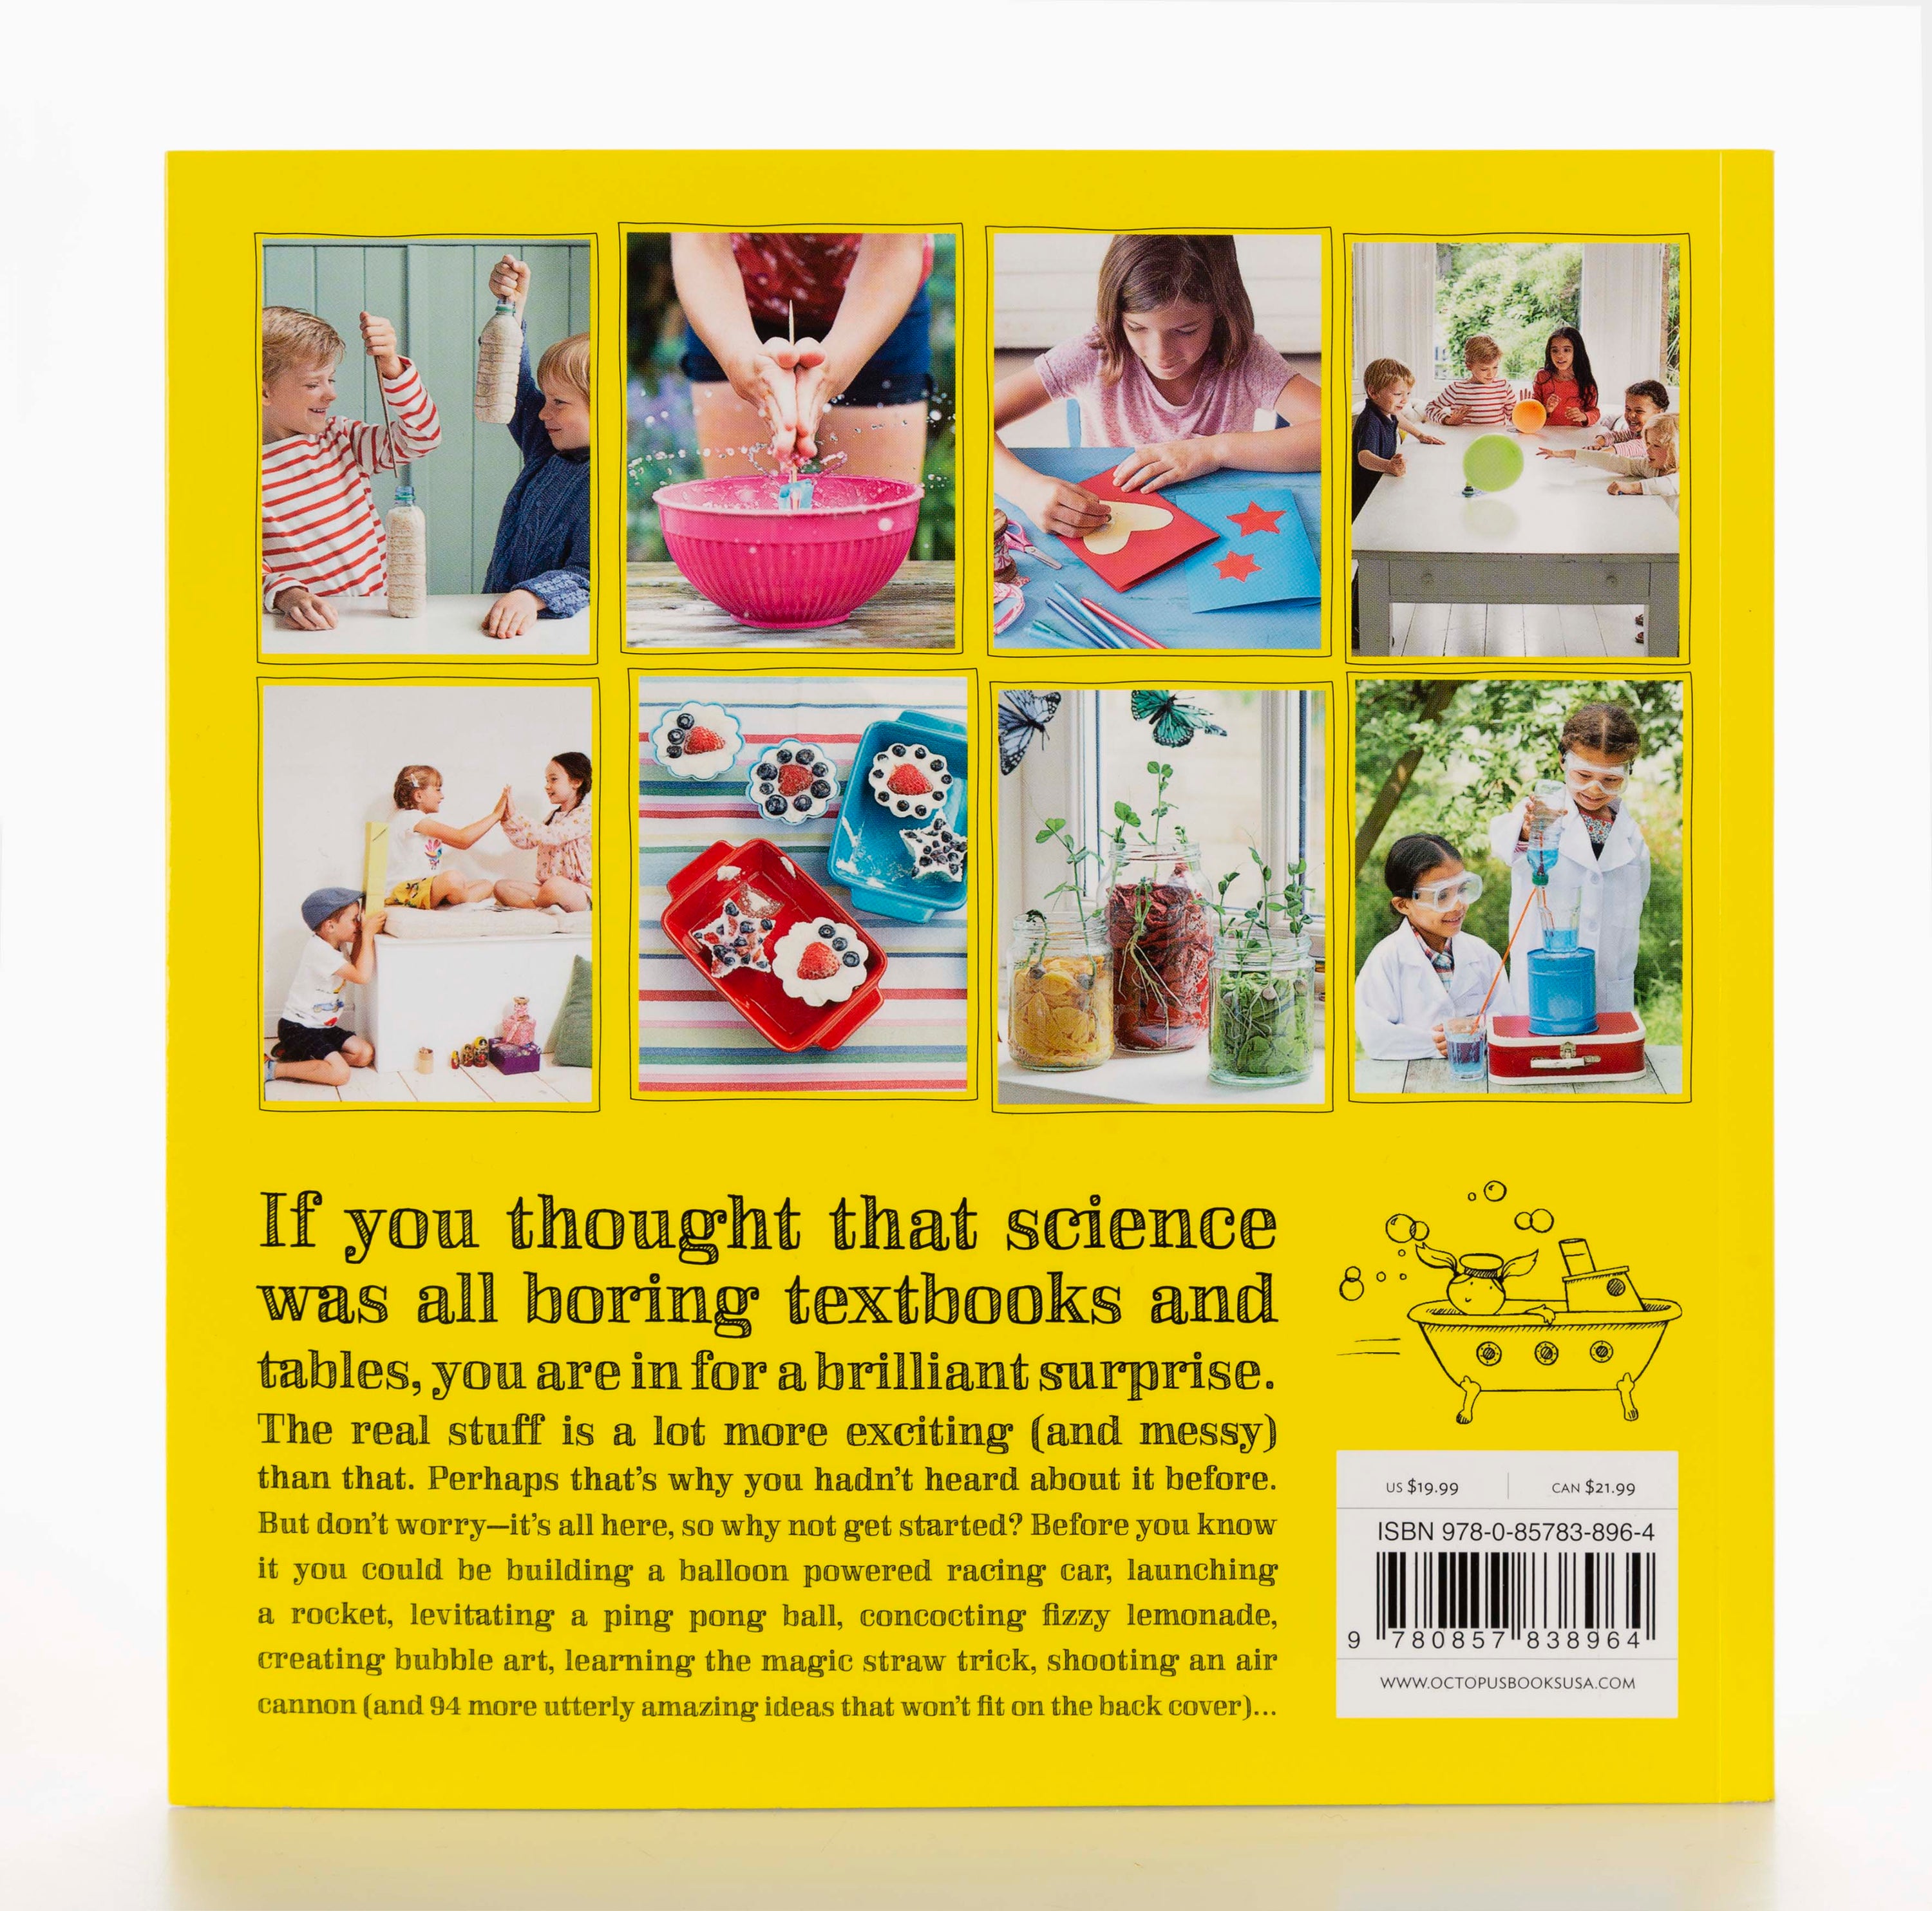 101 Brilliant Things For Kids to do With Science